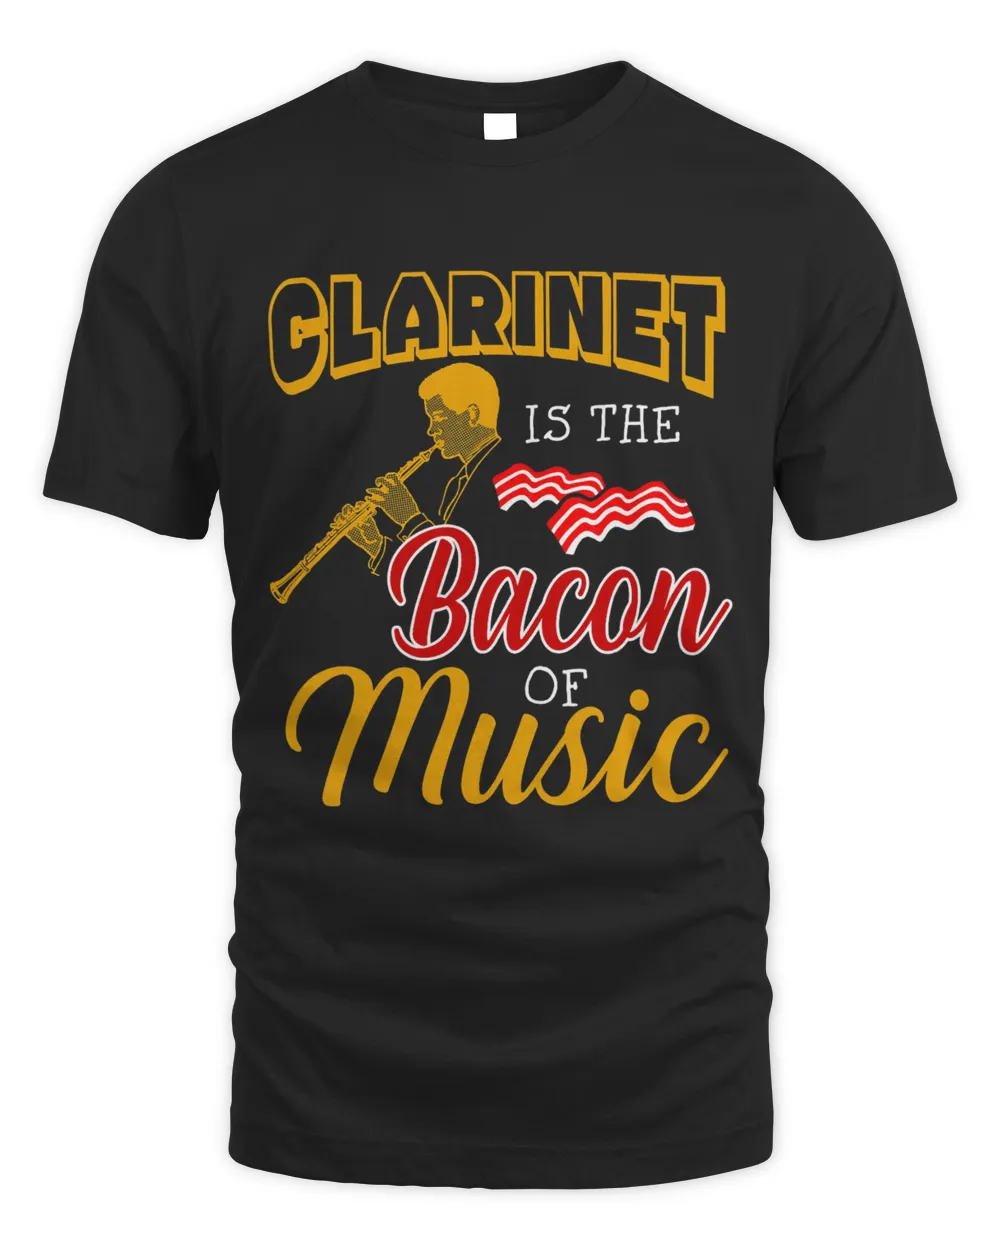 Clarinet Player Tee Clarinet is The Bacon Of Music